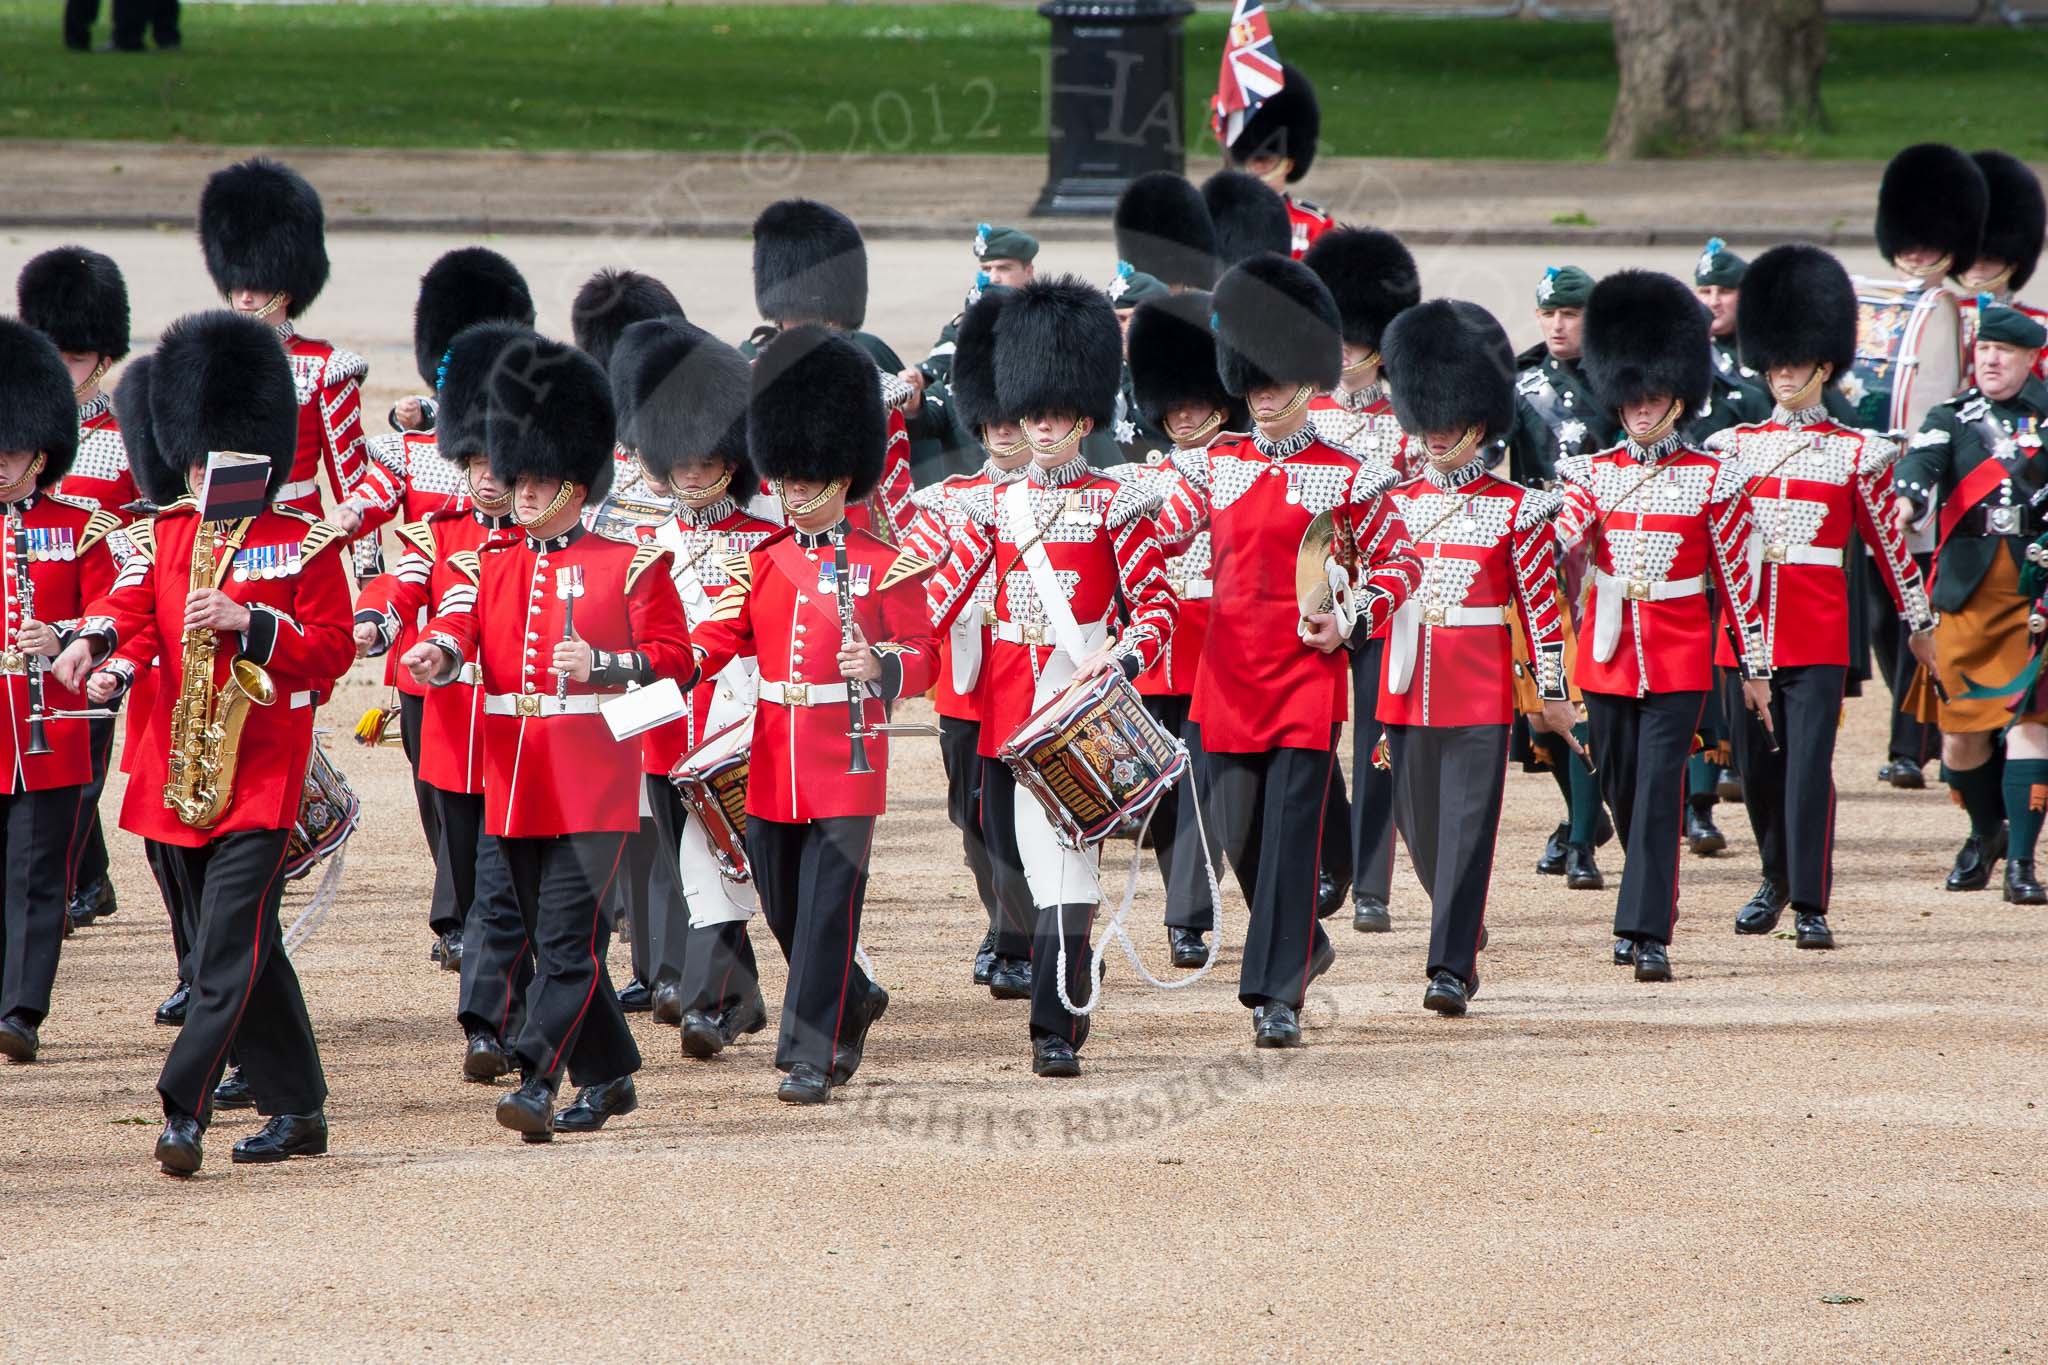 The Colonel's Review 2012: The Band of the Irish Guards getting into position at Horse Guards Parade..
Horse Guards Parade, Westminster,
London SW1,

United Kingdom,
on 09 June 2012 at 10:23, image #52